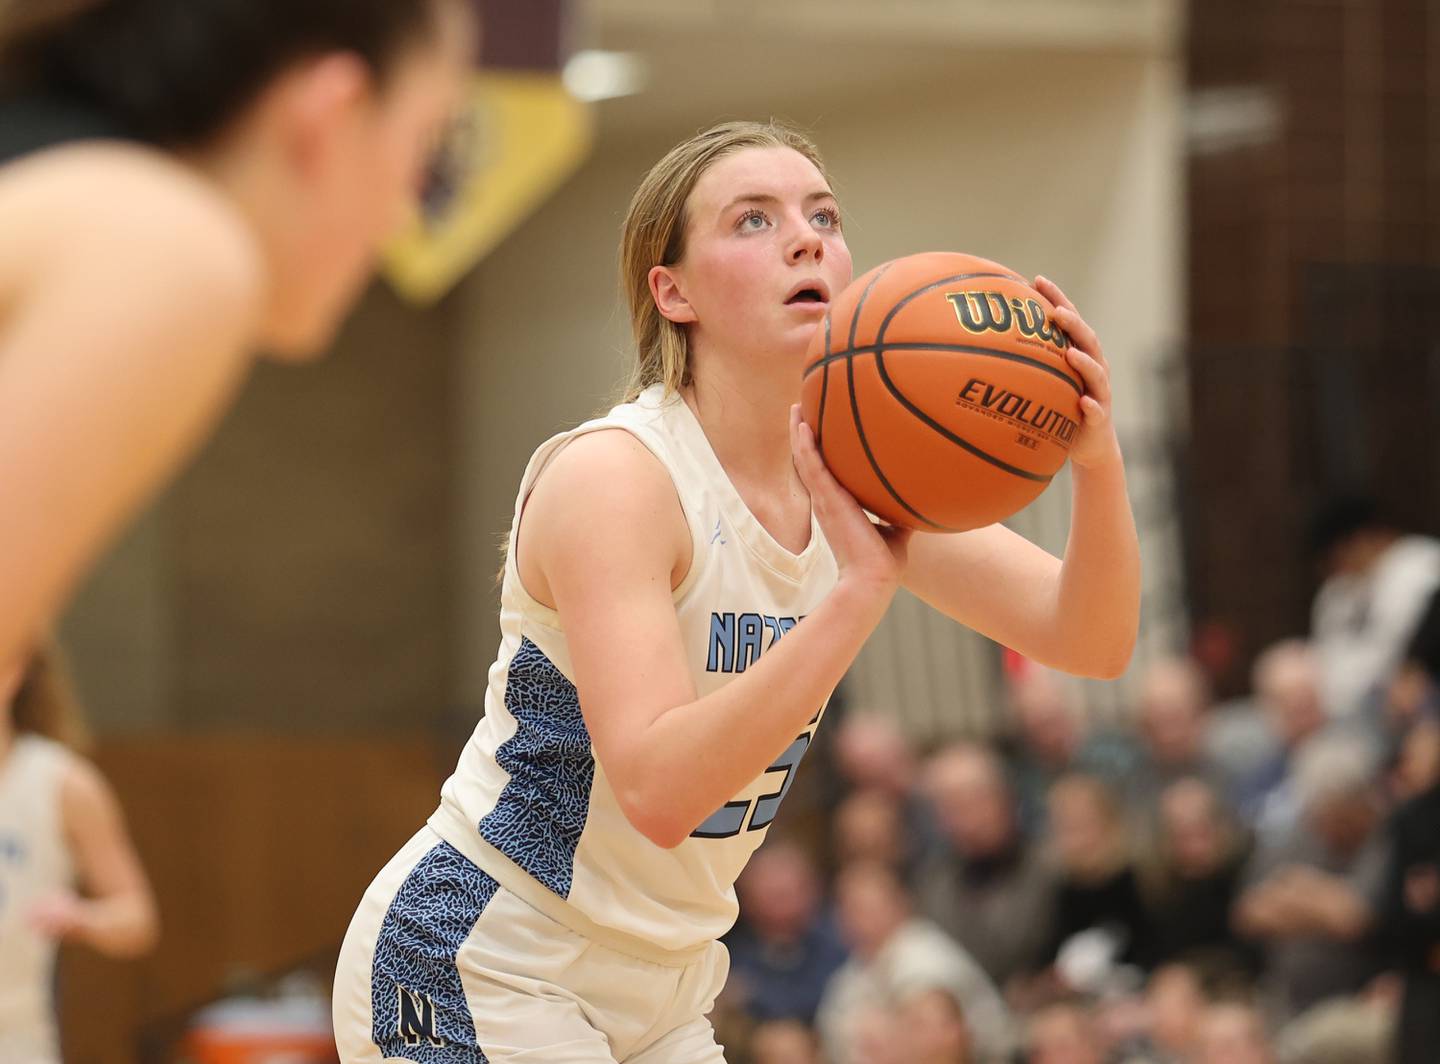 Nazareth's Amalia Dray (25) shoots a freethrow during the girls 3A varsity super-sectional game between Nazareth Academy and Fenwick High School in River Forest on Monday, Feb. 27, 2023.